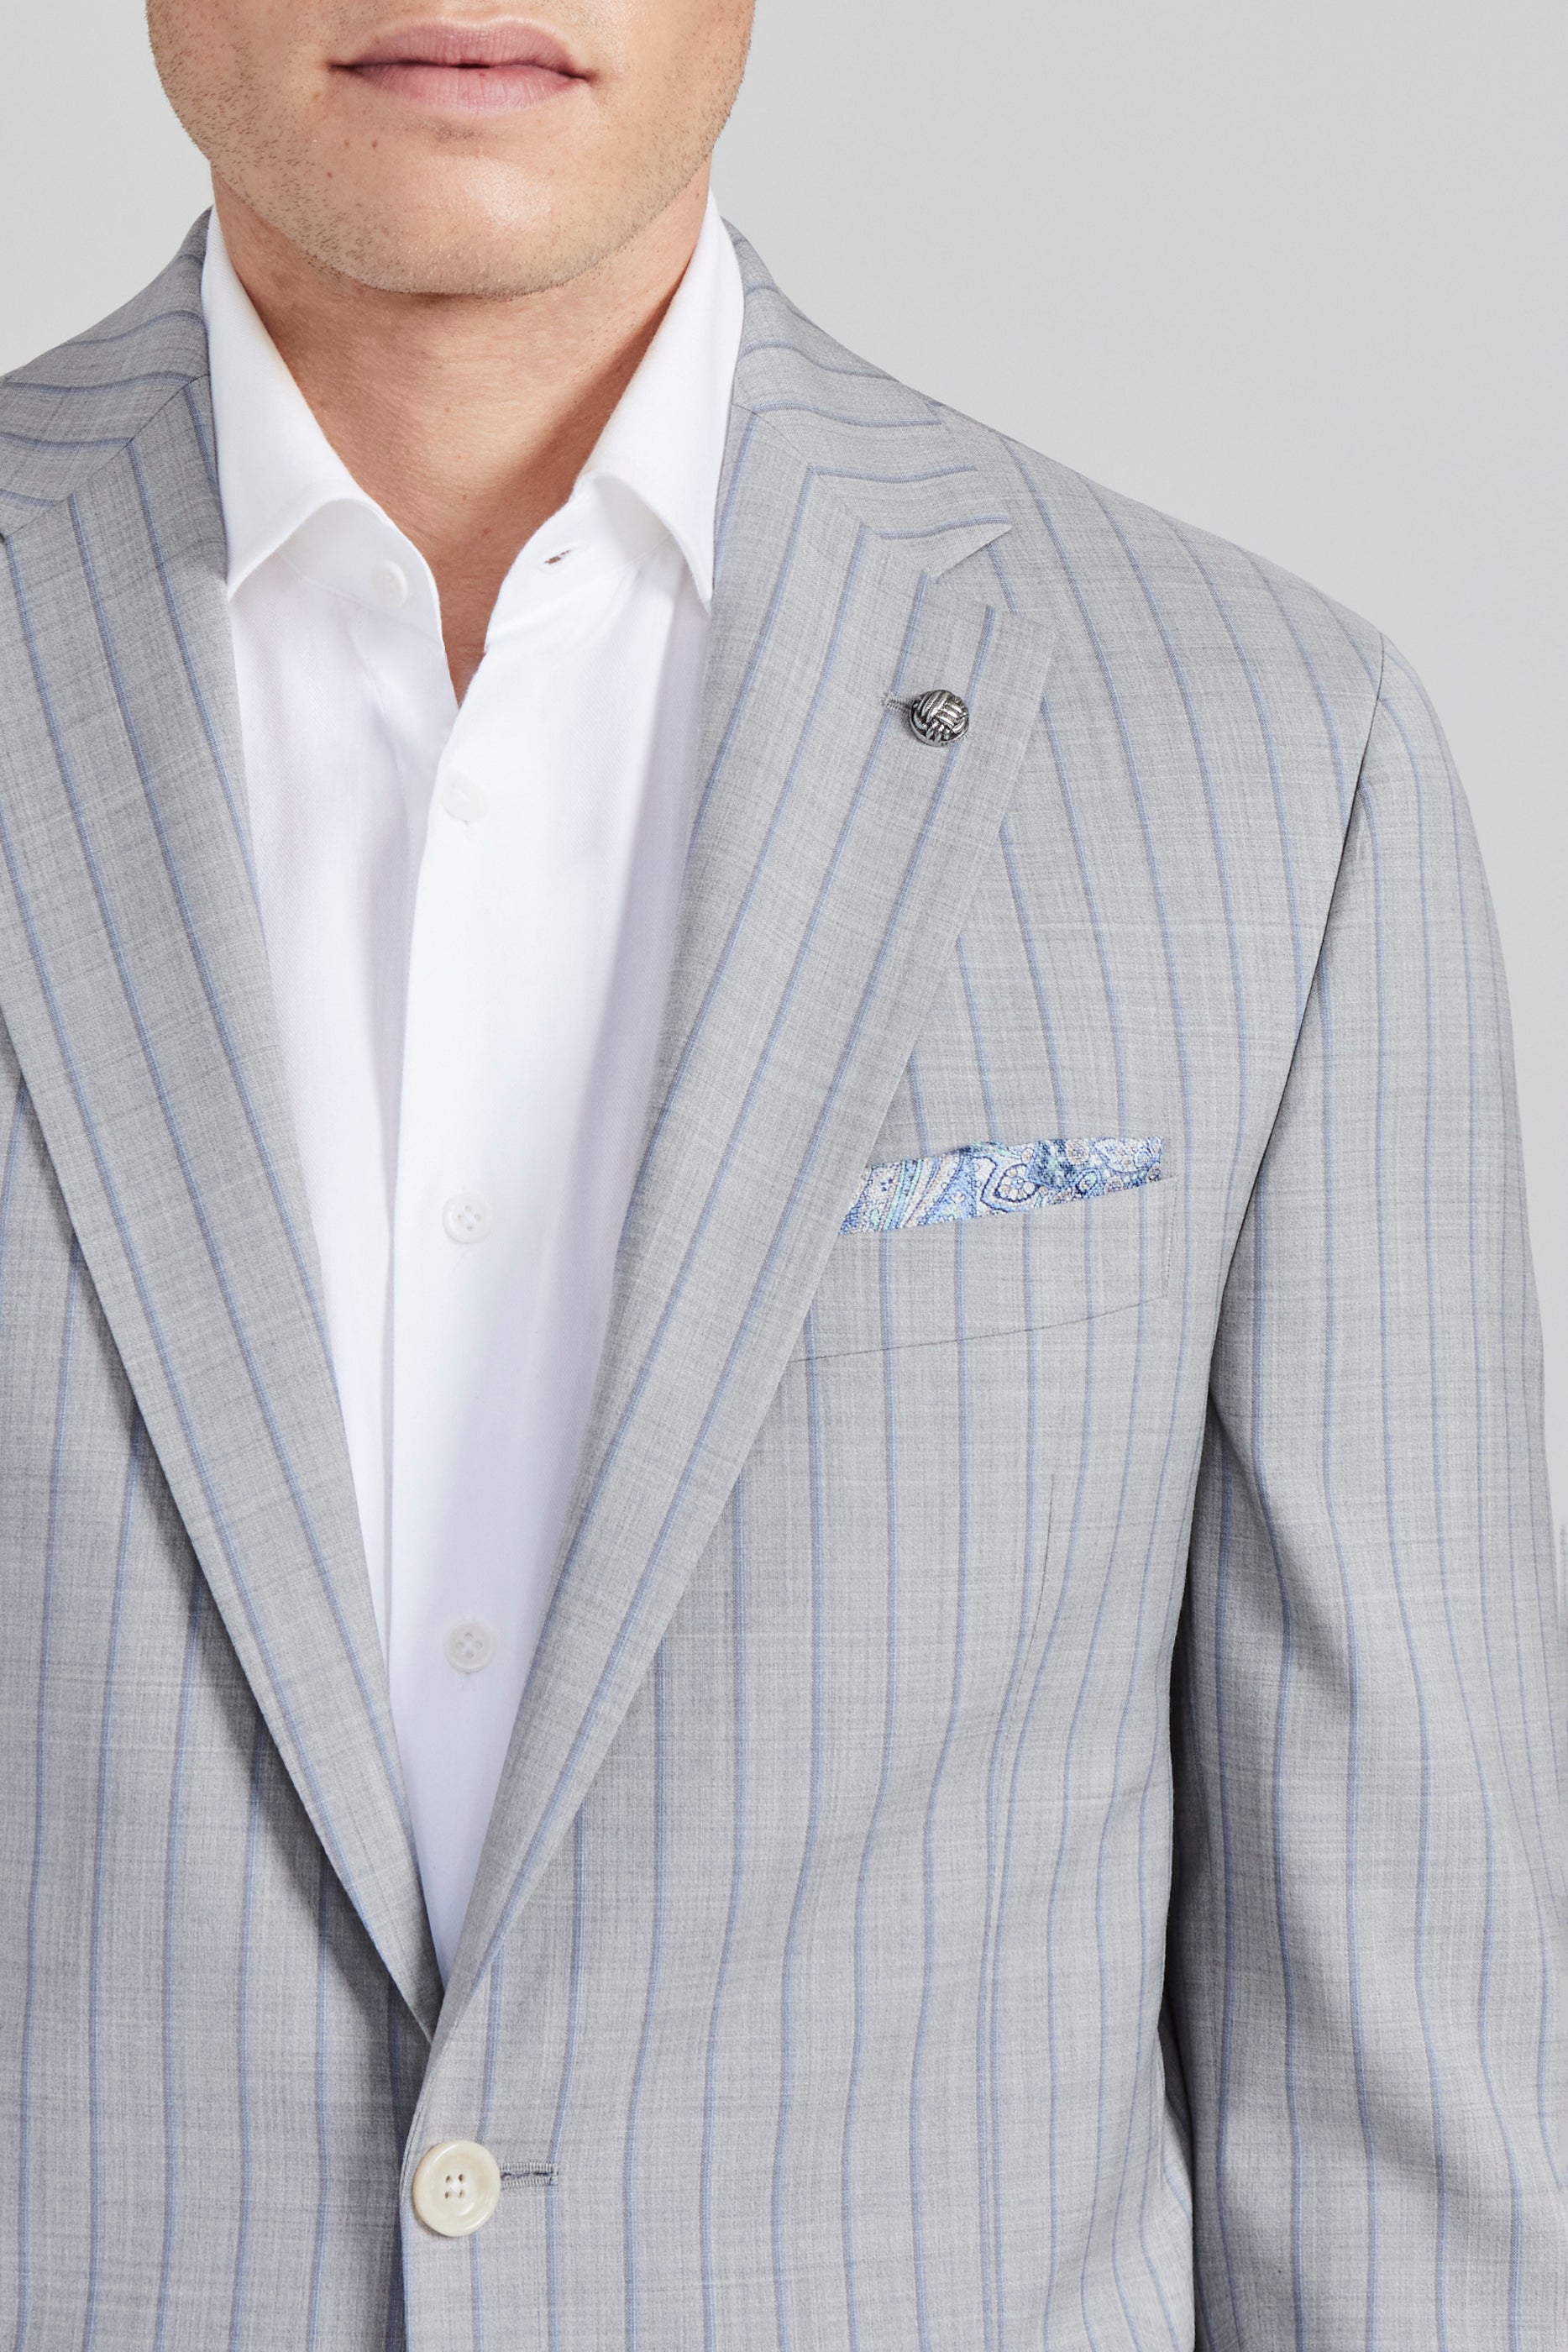 Alt view 1 Esprit Pinstripe Wool Suit in Light Grey and Blue